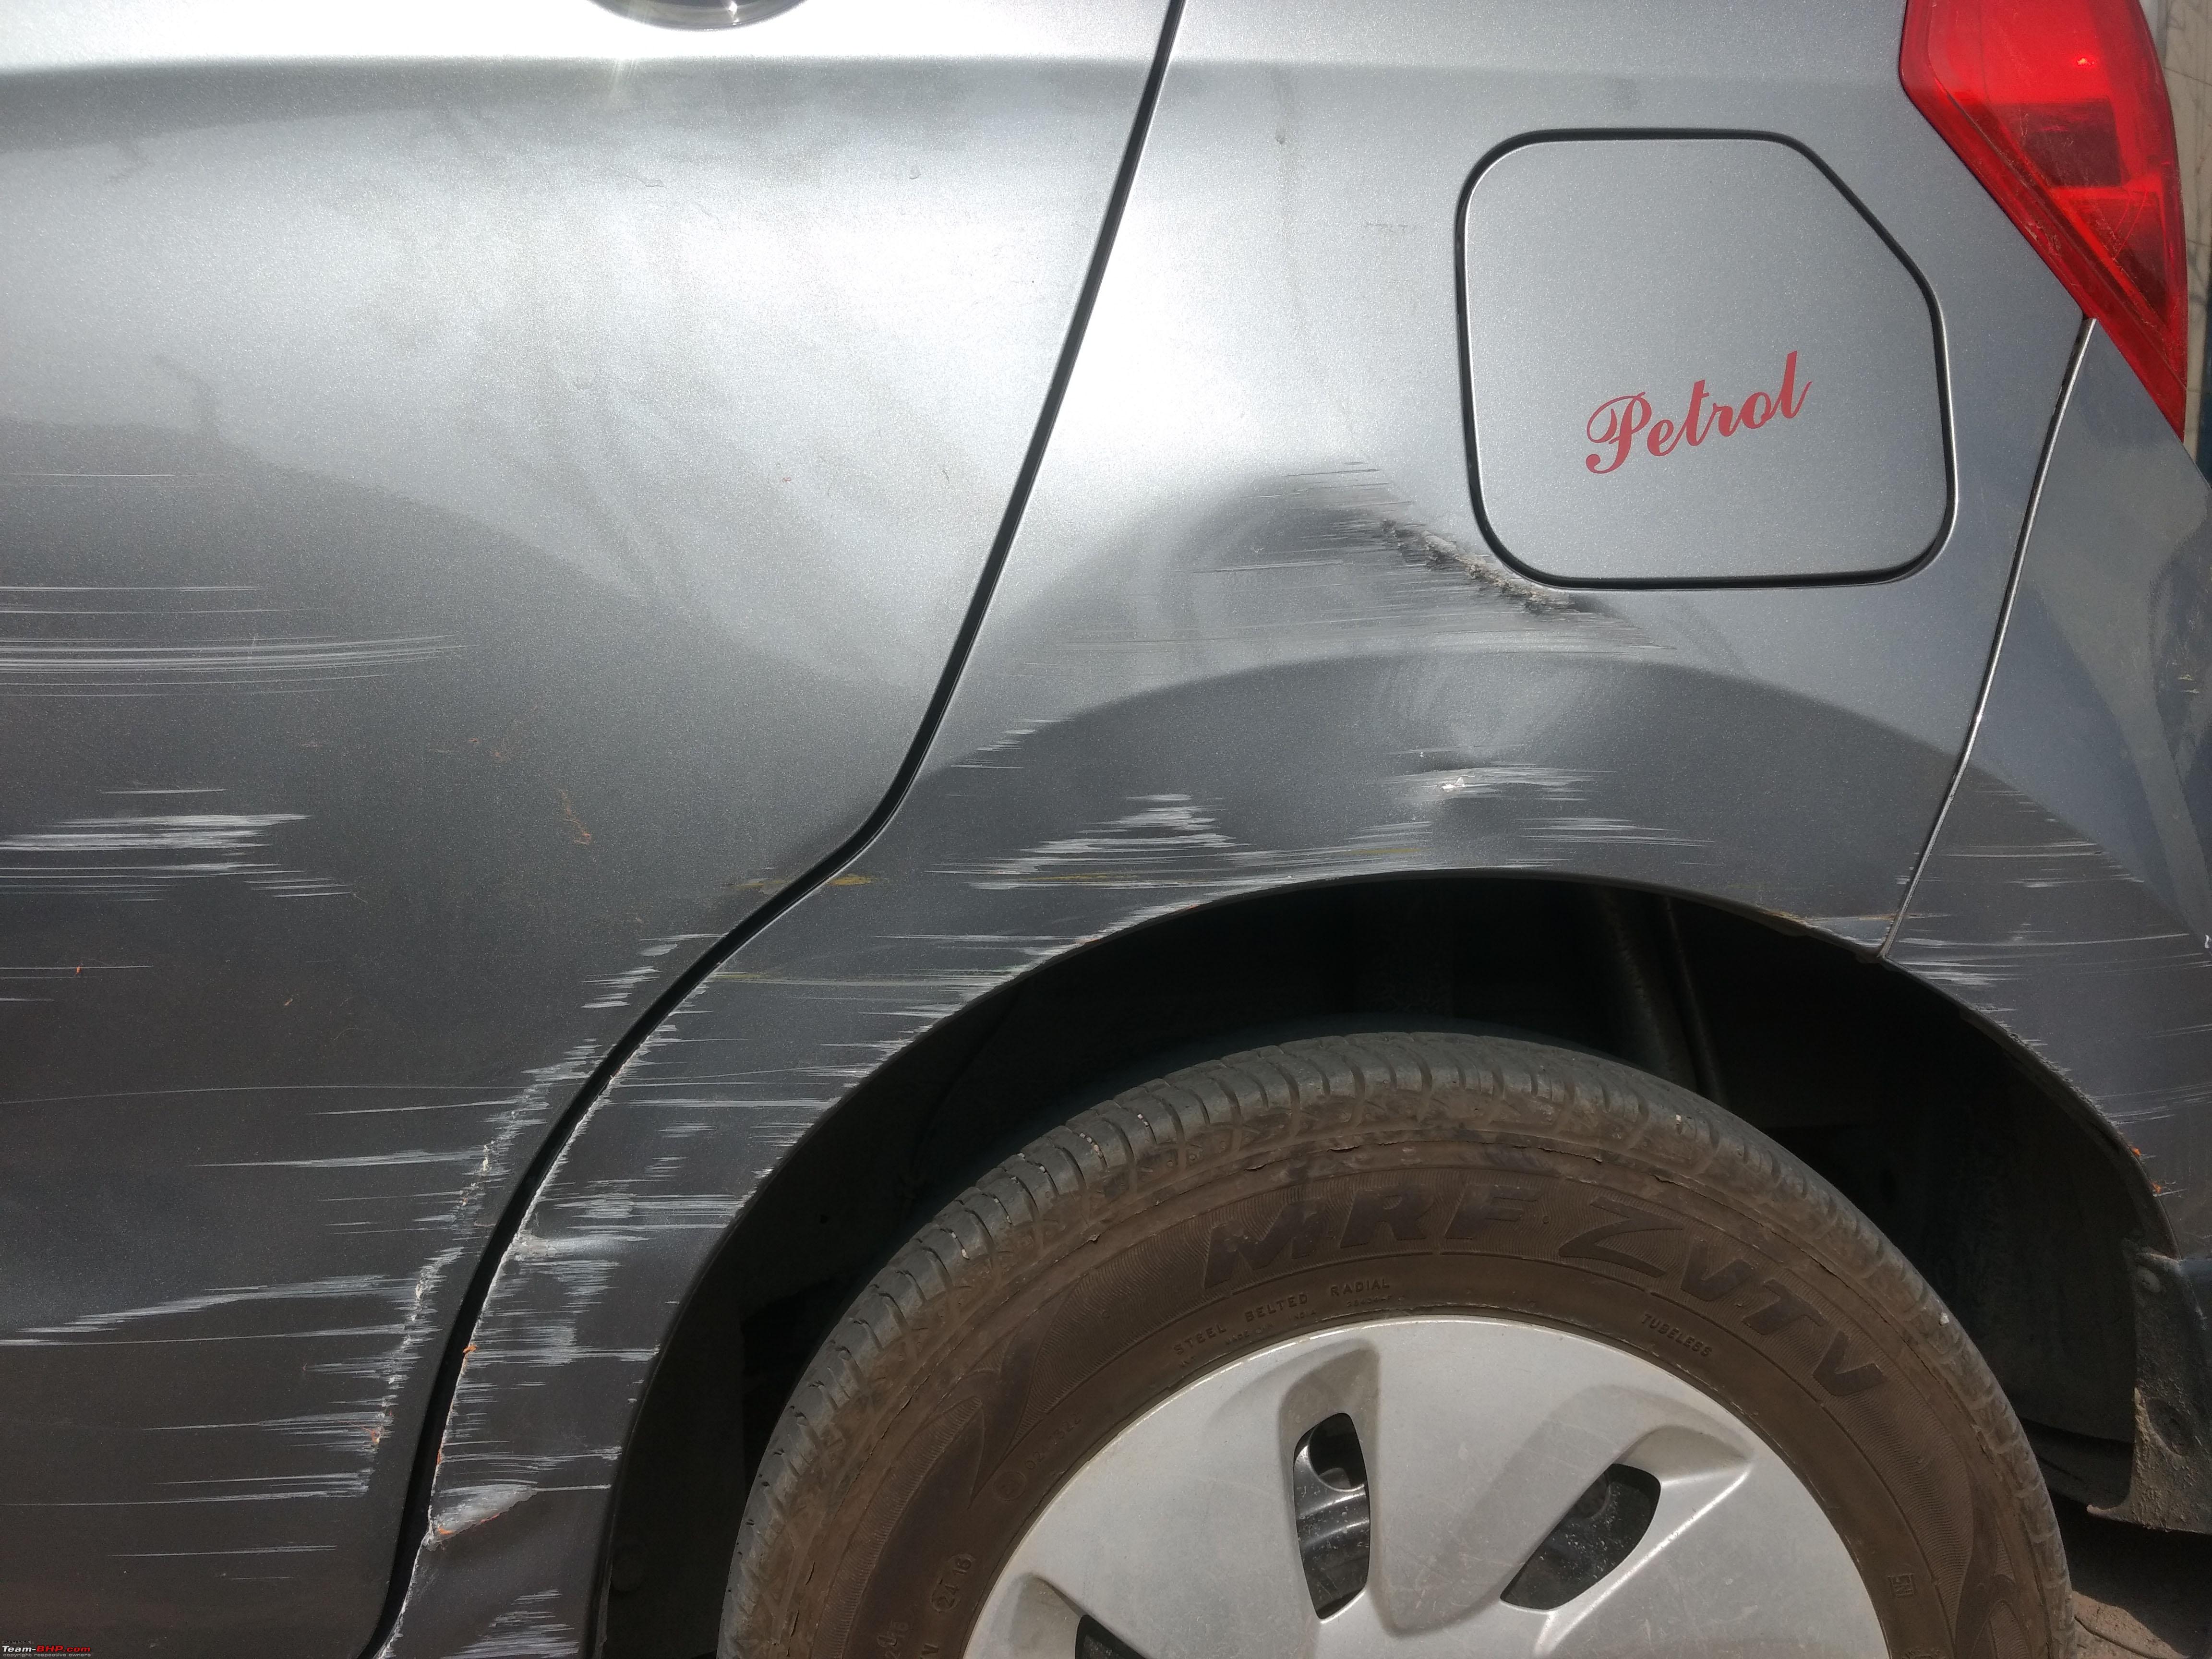 All about car dent repair & painting - Processes, methods & tools - Page 6  - Team-BHP